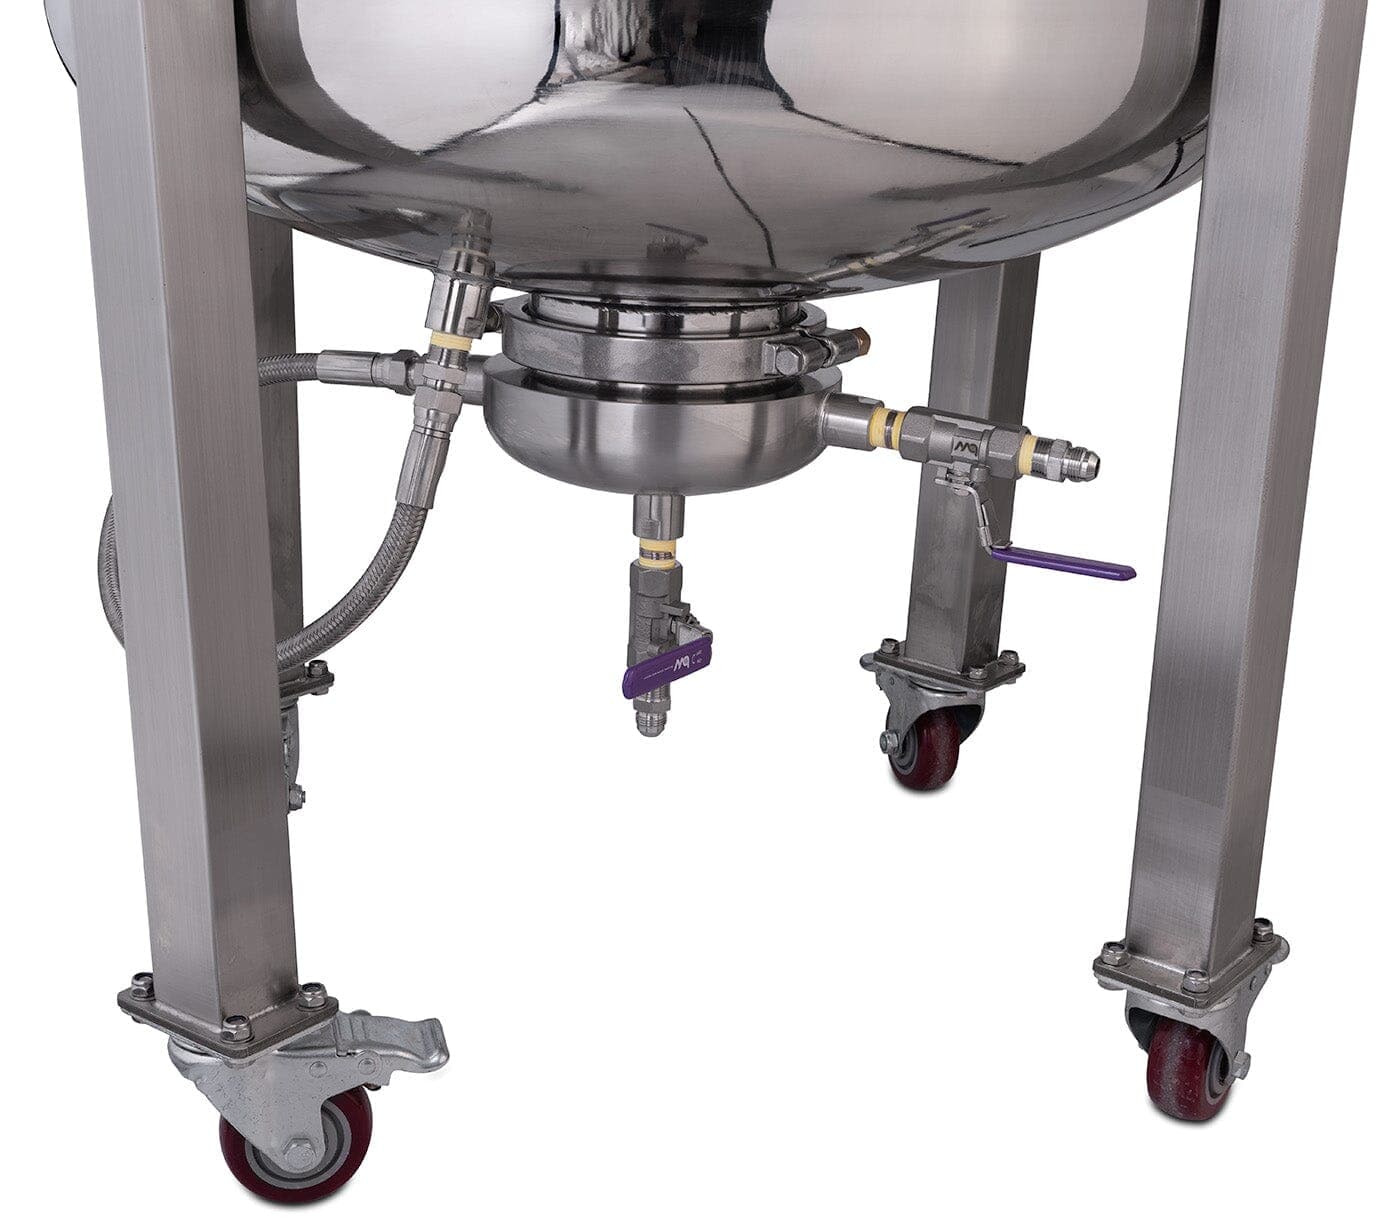 Fully Jacketed Parts BVV Pre-Built 150L 304SS Jacketed Collection and Storage Vessel with 12" Tri-Clamp Port and Locking Casters